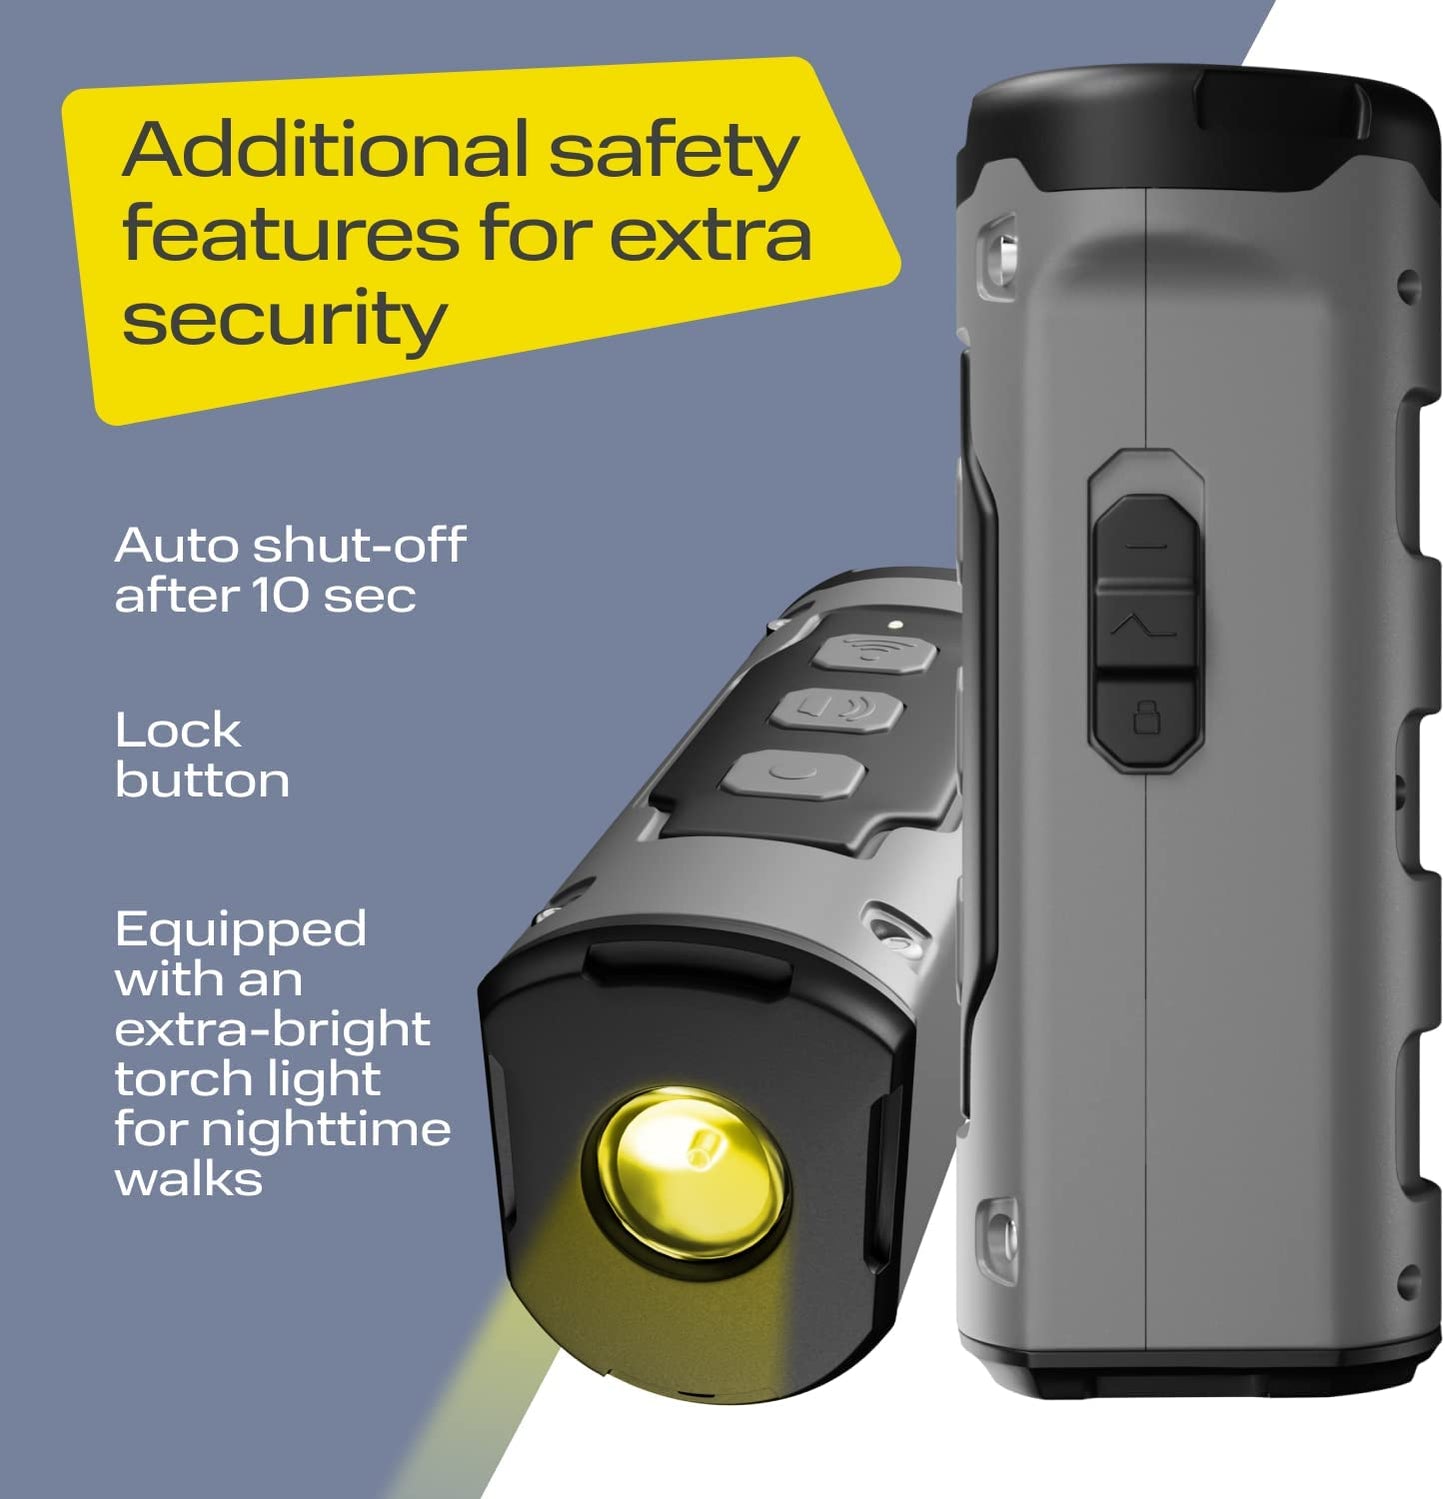 ultrasonic_additional safety features for extra security auto shut-off after 10 sec lock button equipped with an extra-bright torch light for nighttime walks